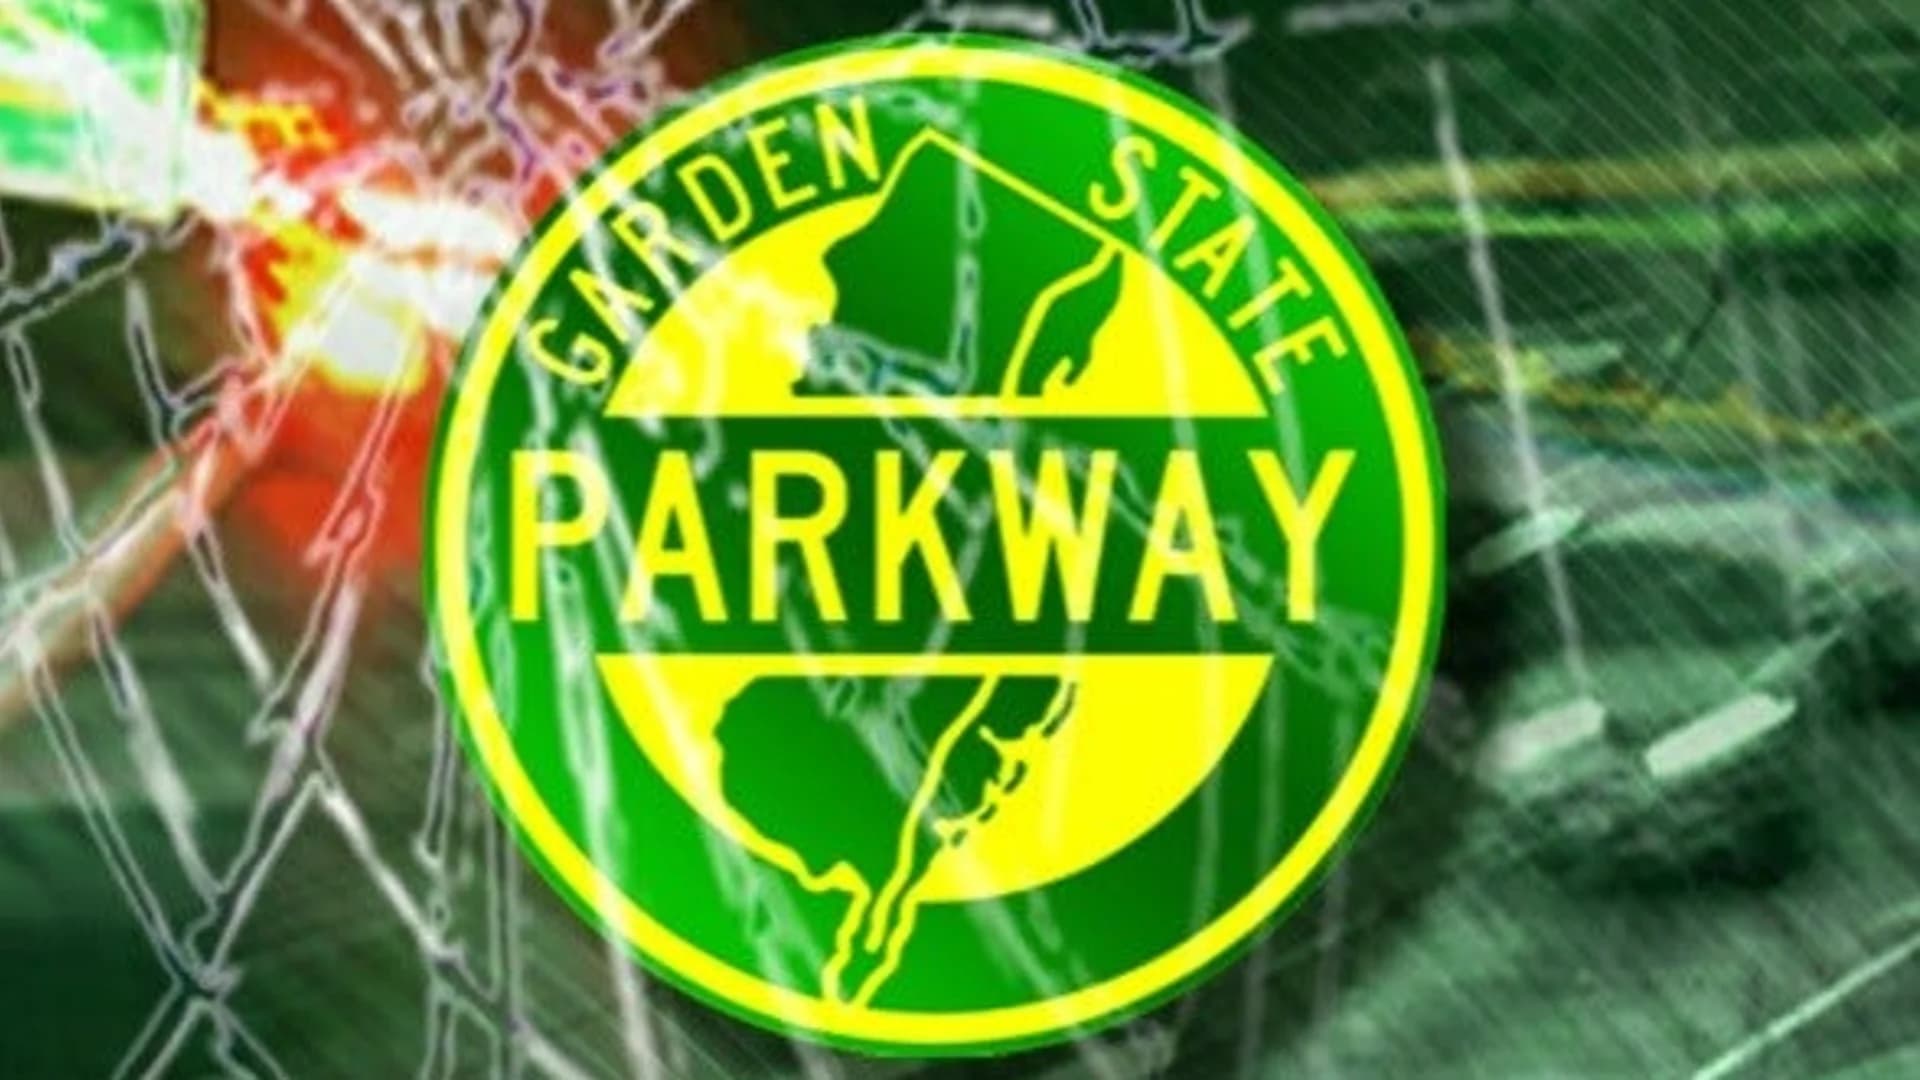 State police: 1 killed following crash on parkway